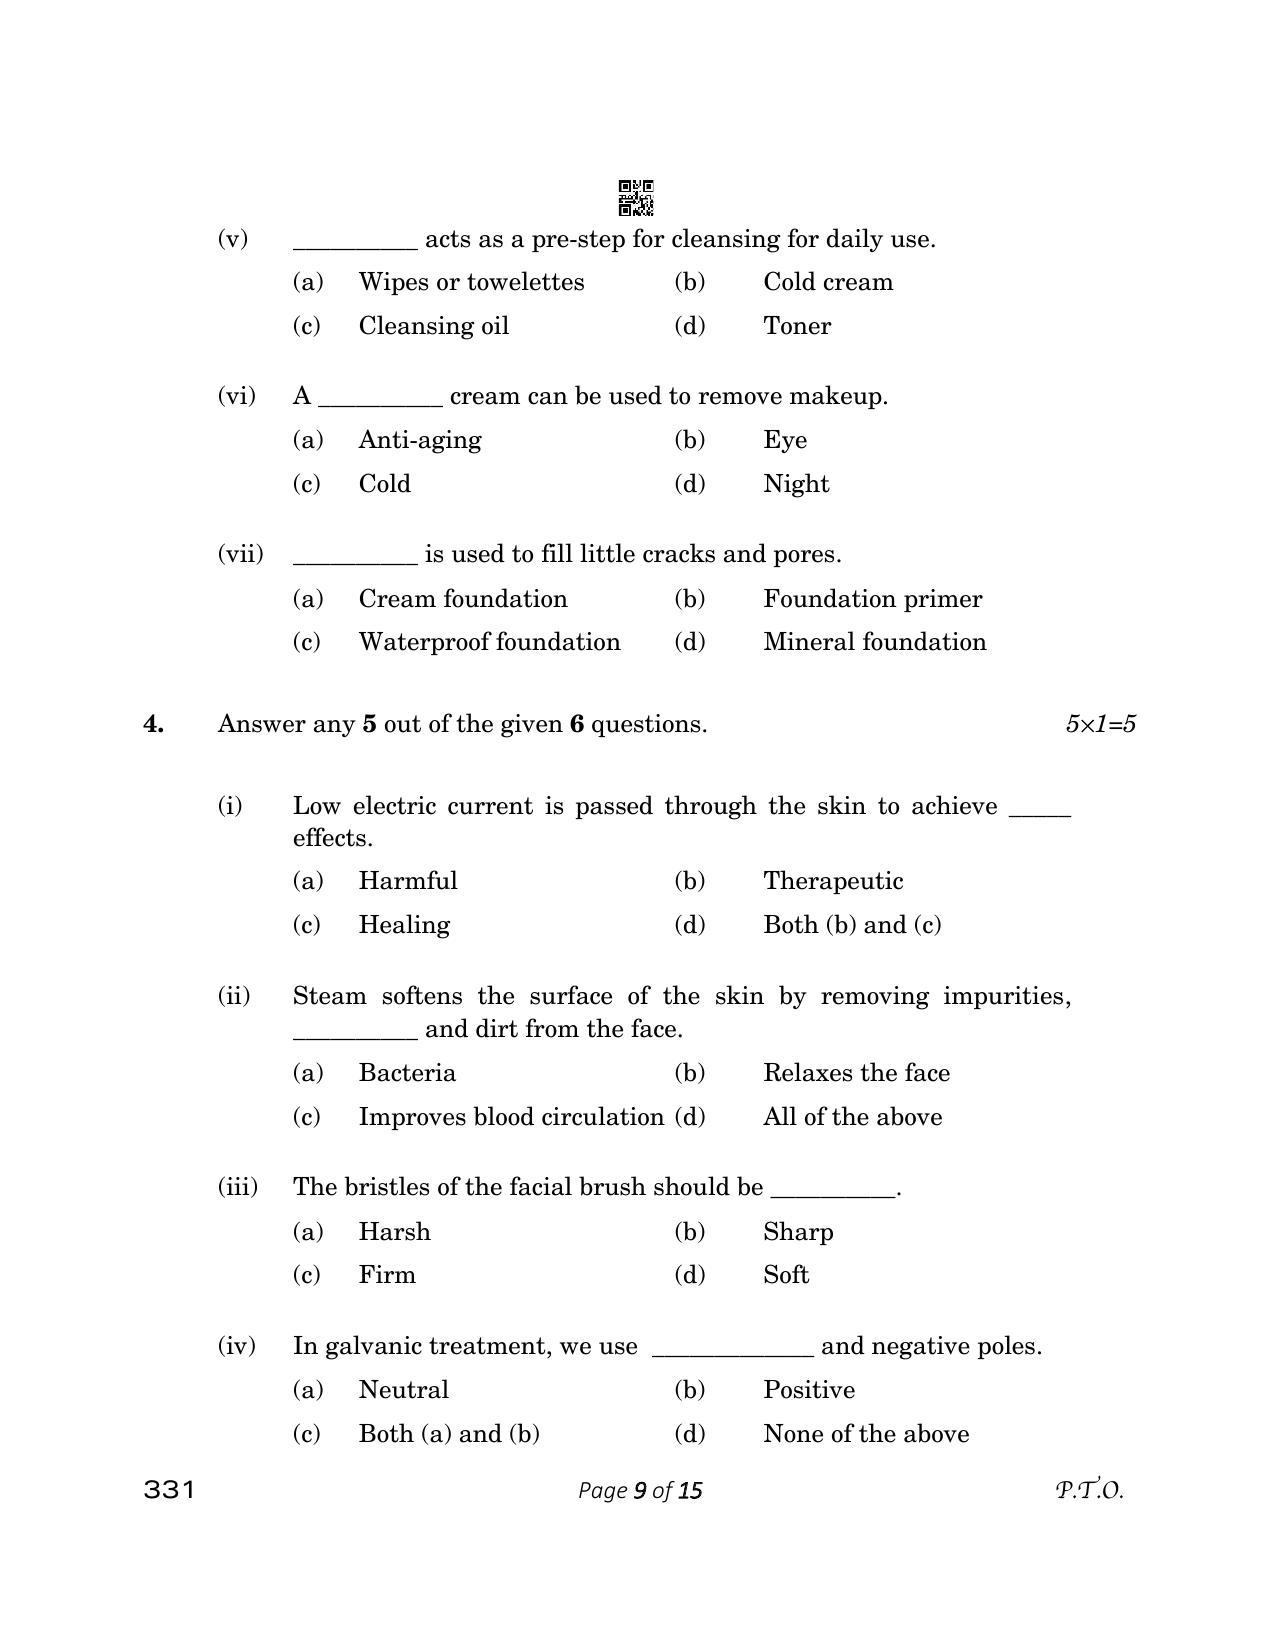 CBSE Class 12 331 Beauty And Wellness 2023 Question Paper - Page 9